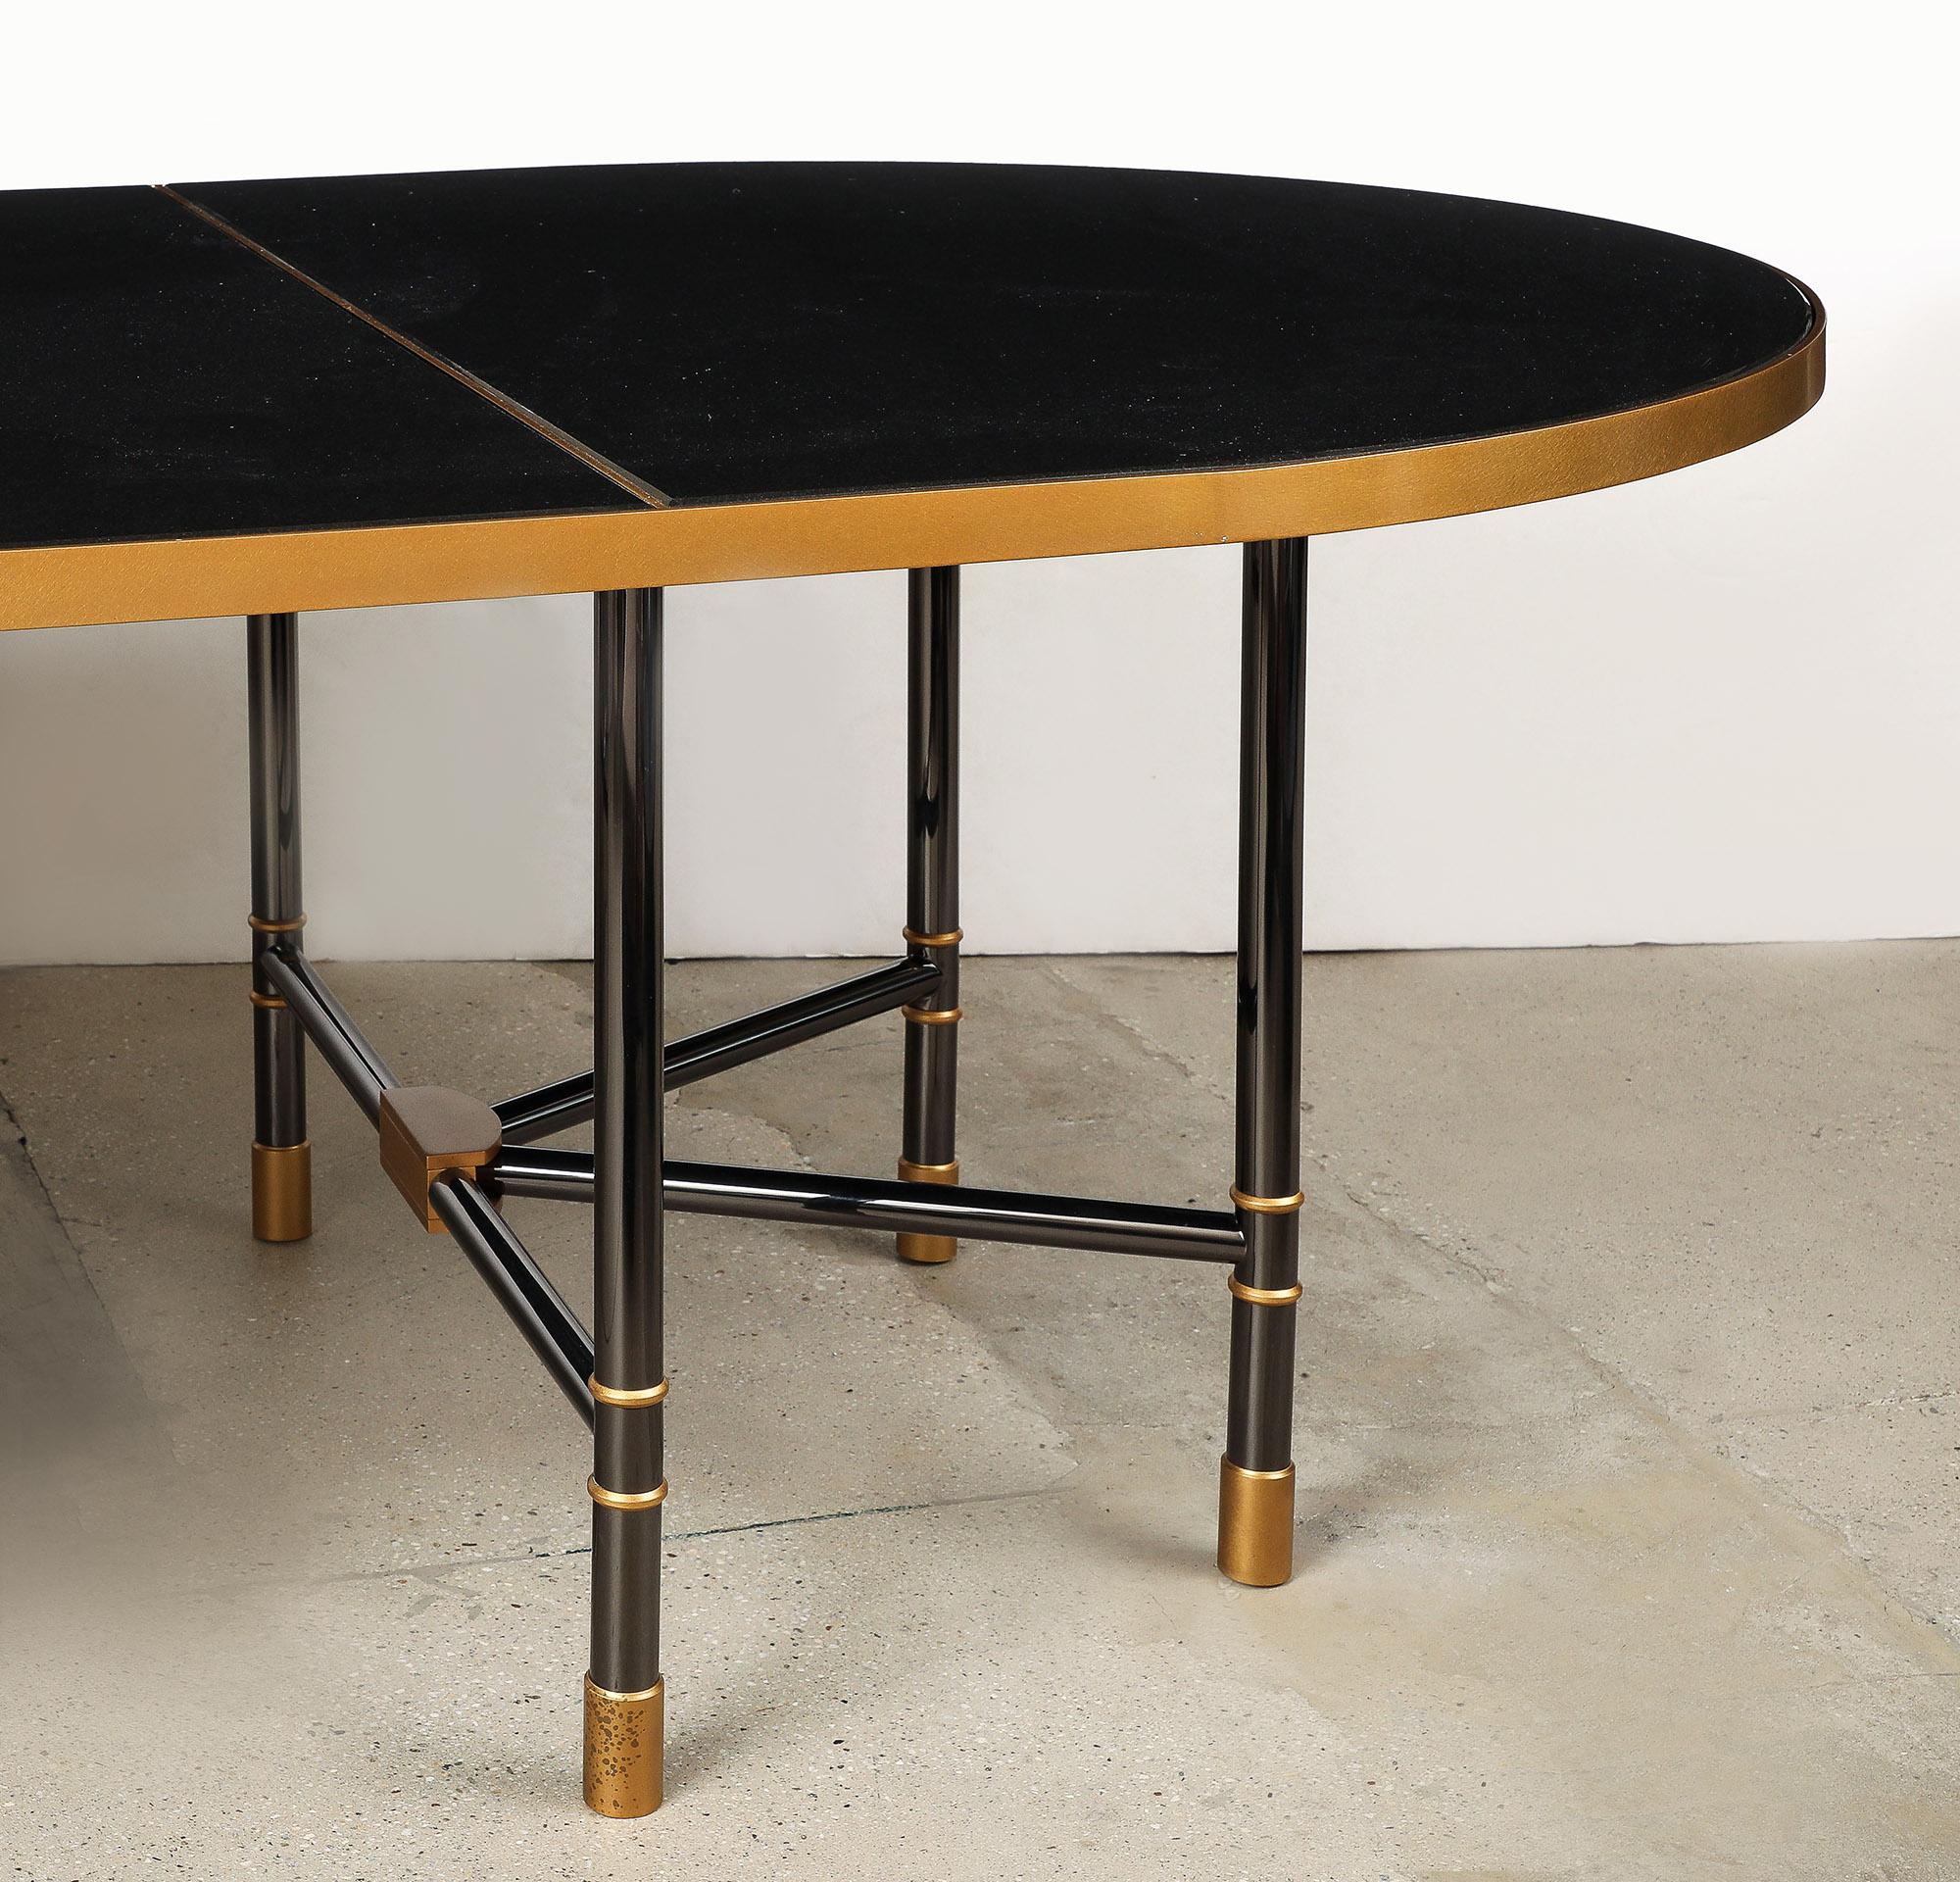 A Unique and Superb Bronze and Granite Dining Table, by Karl Springer In Good Condition For Sale In New York, NY